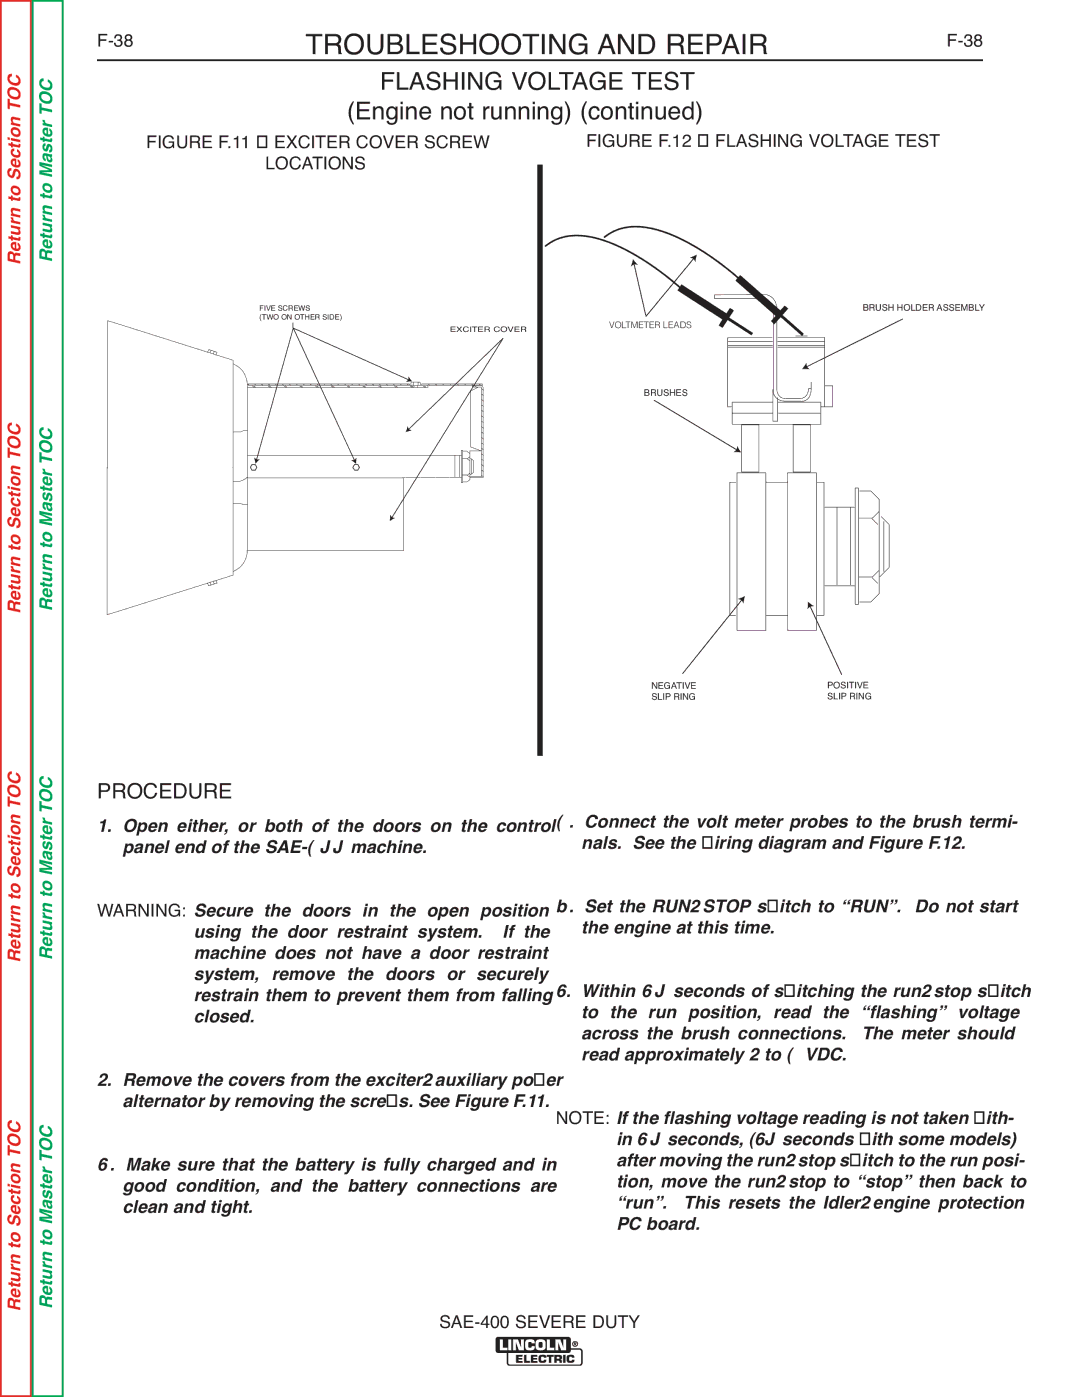 Lincoln Electric SVM187-A service manual Flashing Voltage Test 